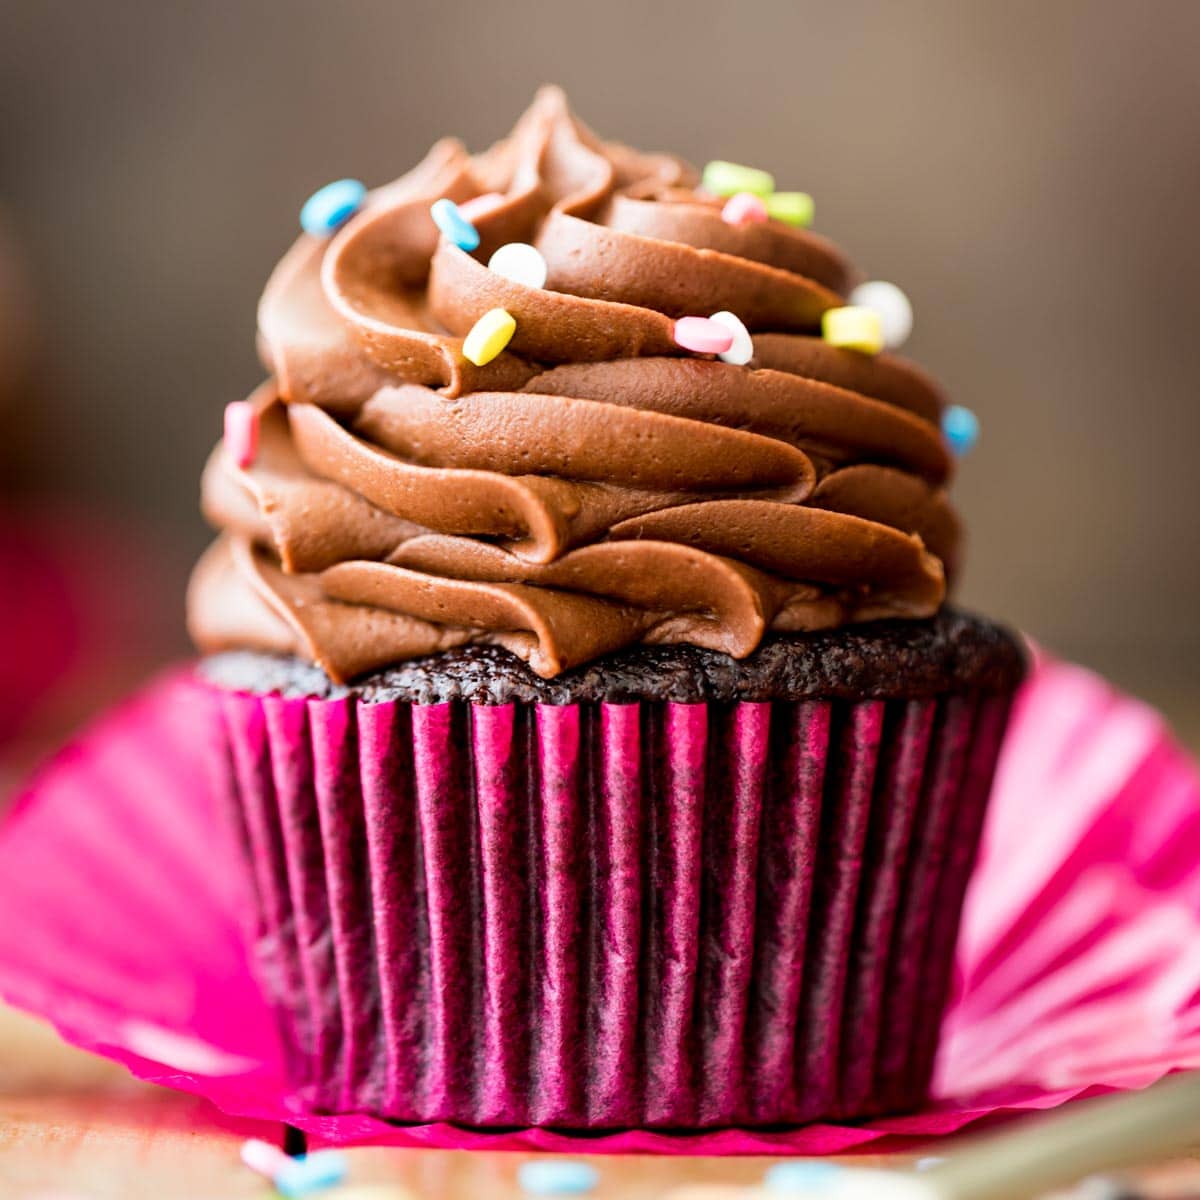 Best-Chocolate-Cupcakes-1-of-1